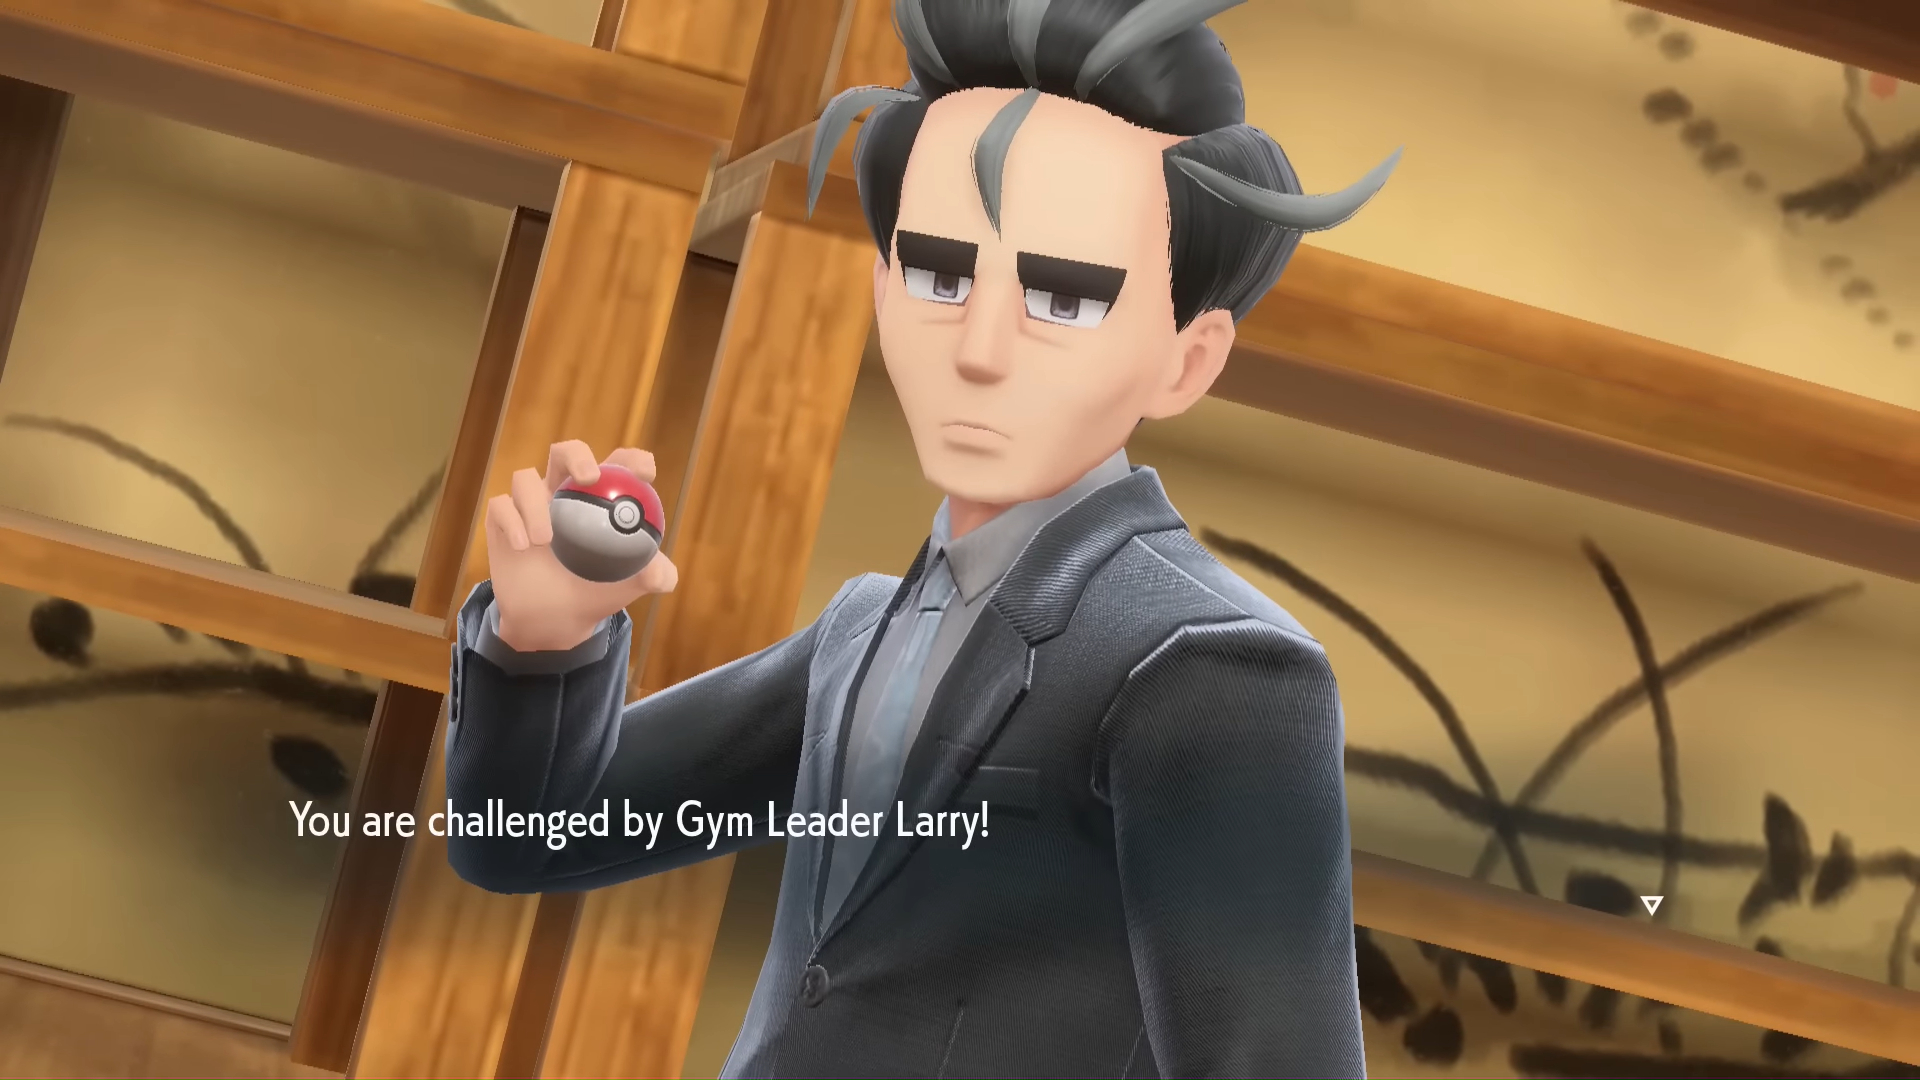 Meet Iono, Pokémon Scarlet and Violet's Electric-Type Gym Leader